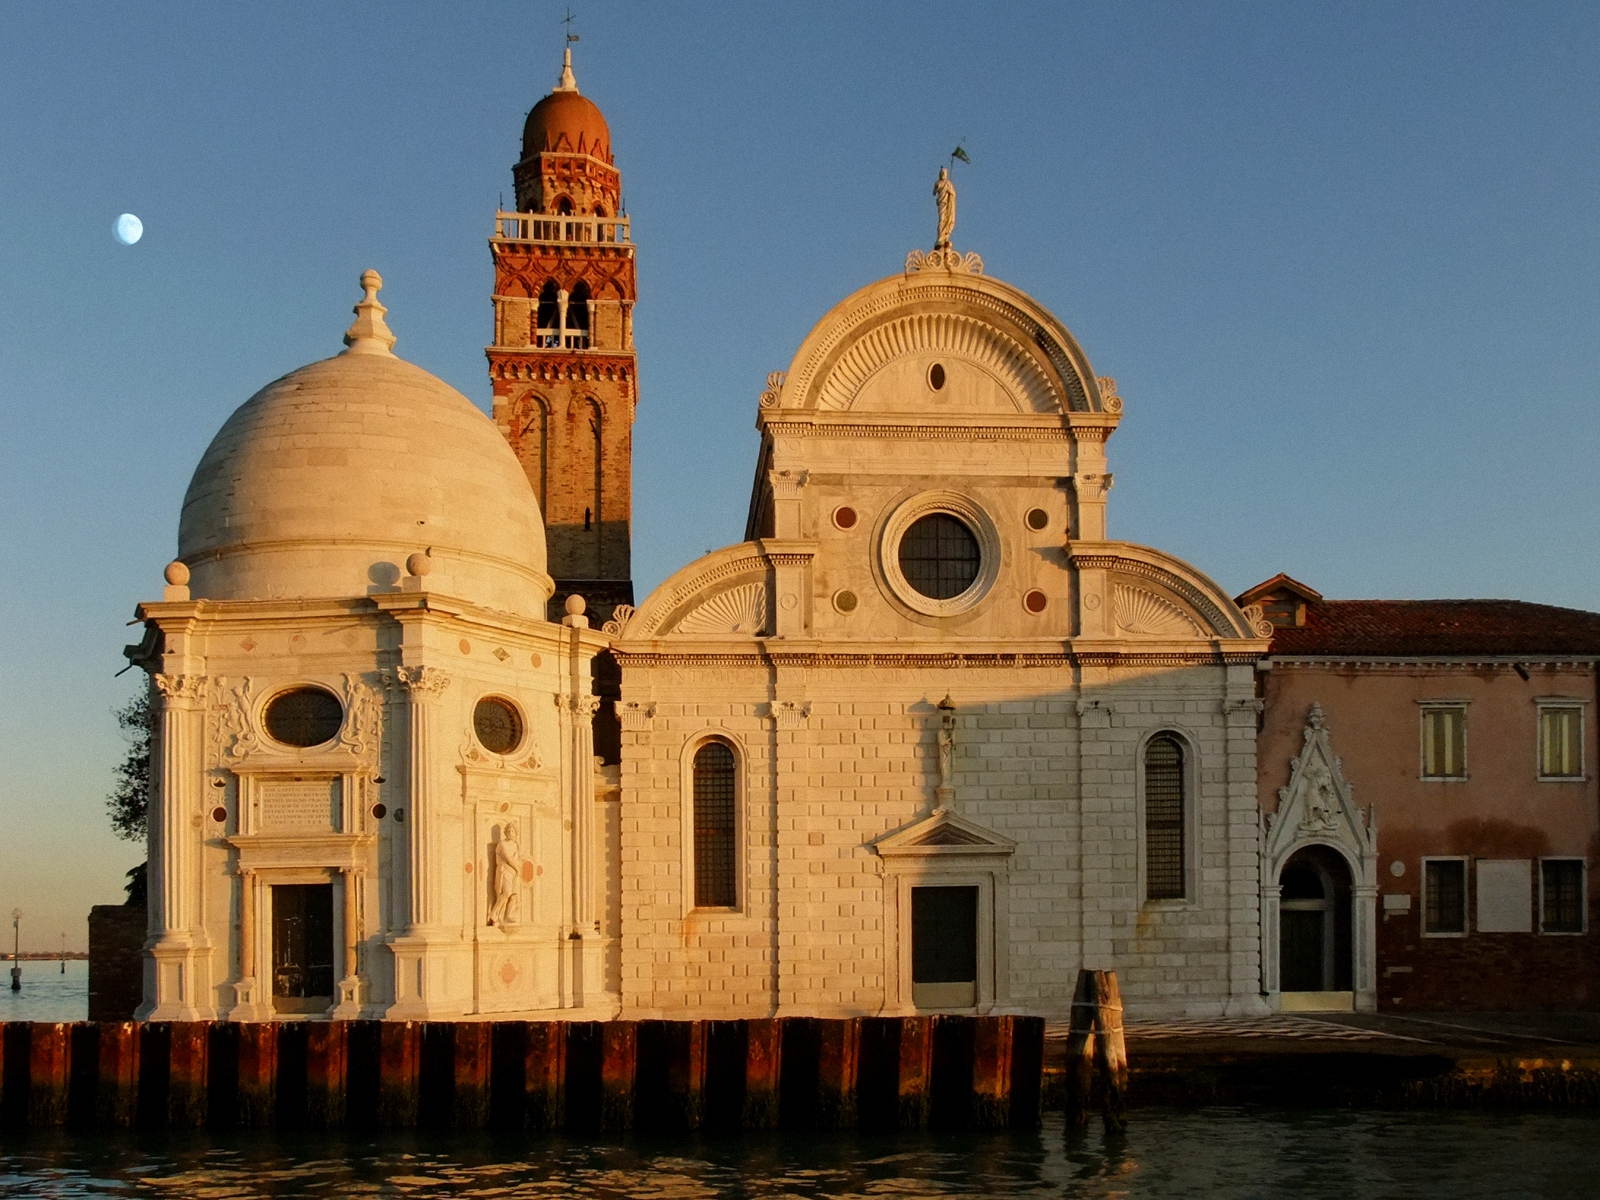 San Michele in Isola, at sunset...